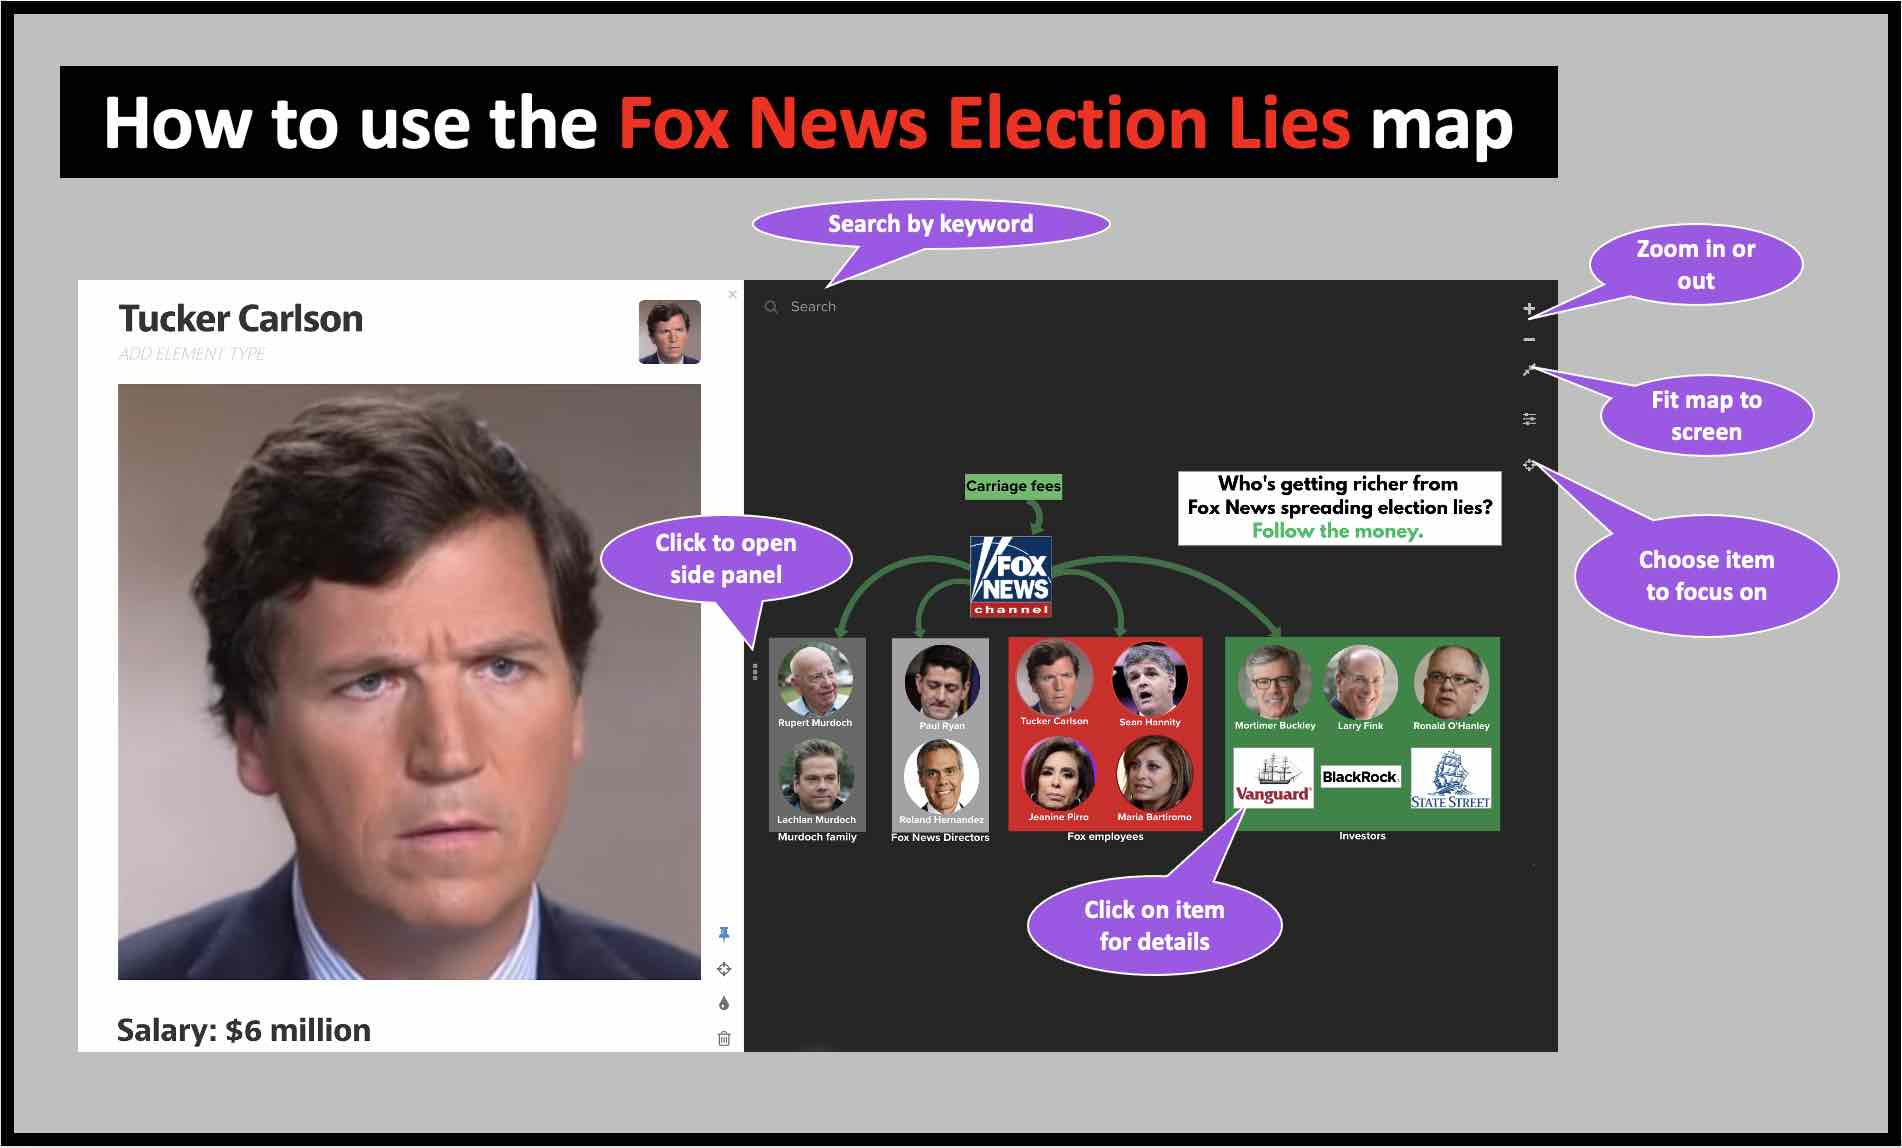 How to use the Fox News election lies map to follow the money